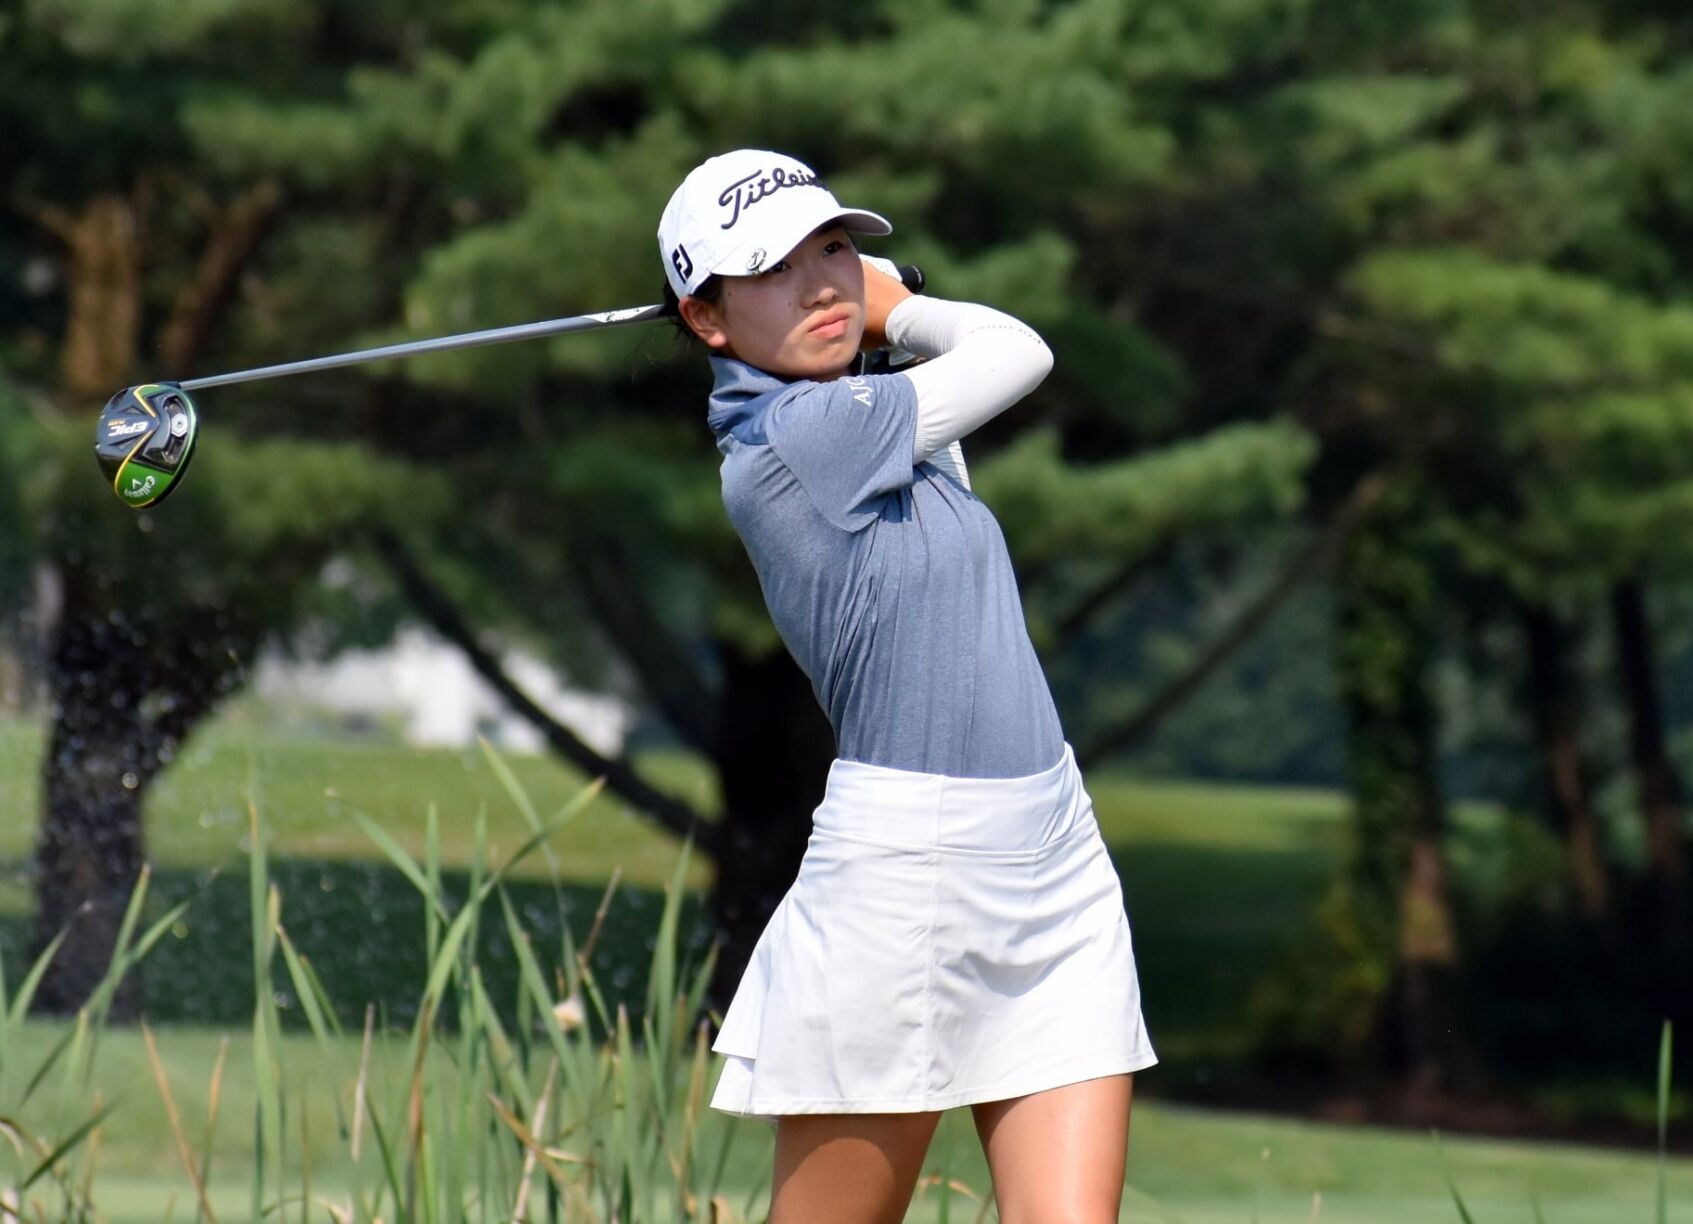 Shins run concludes in semifinals at VSGA Womens Amateur Championship Sports loudountimes